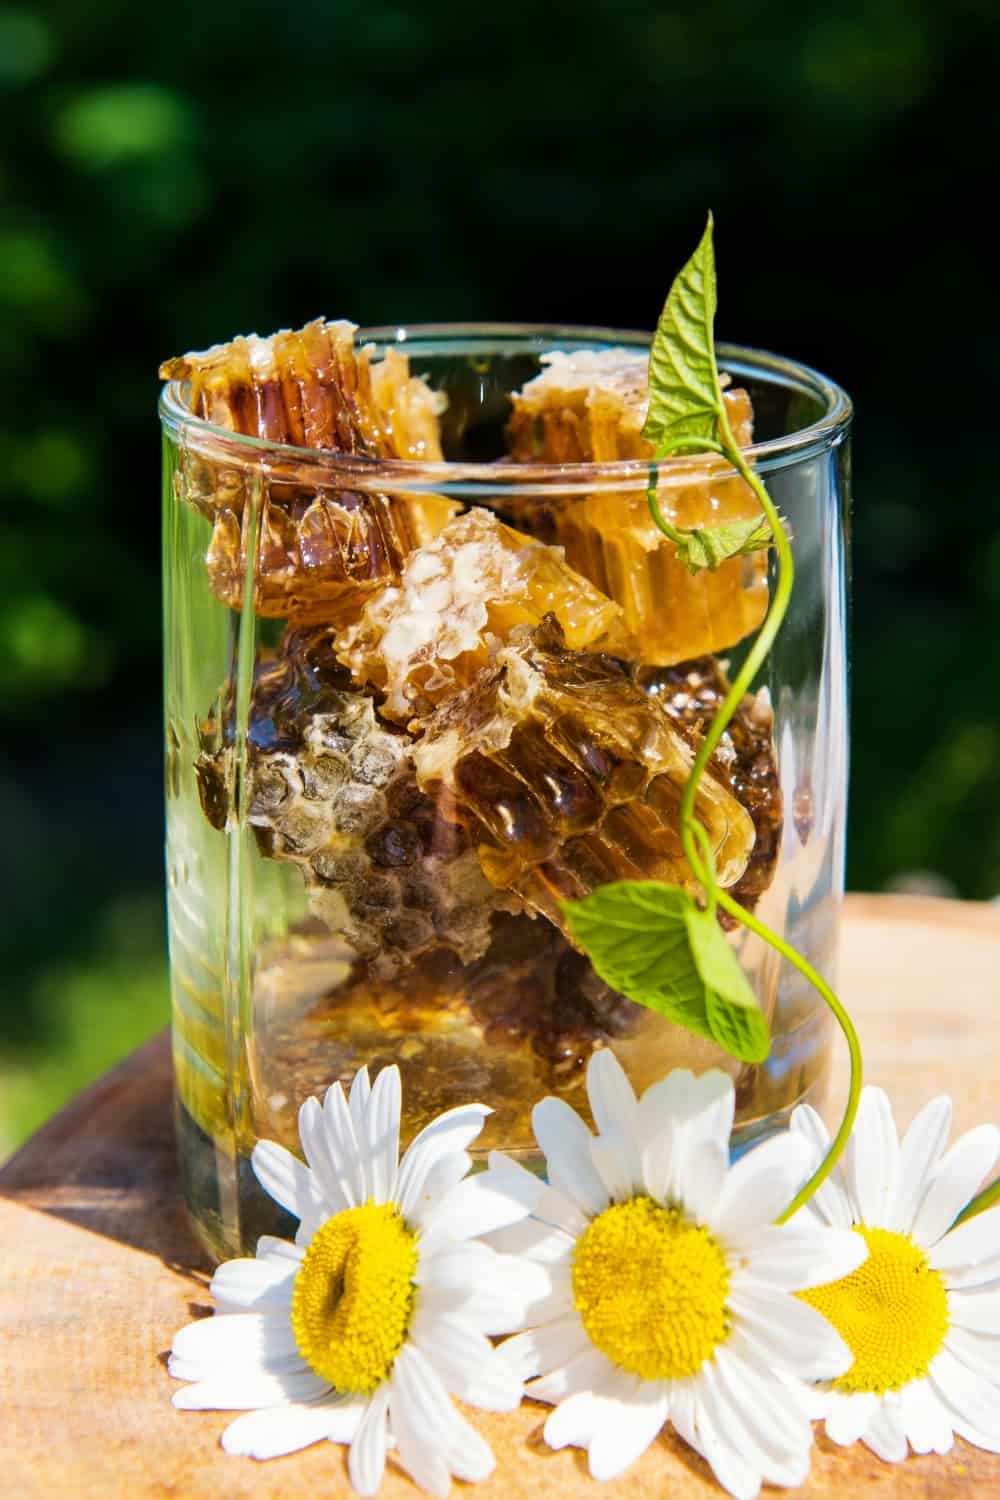 honeycomb in a glass with daisy flowers